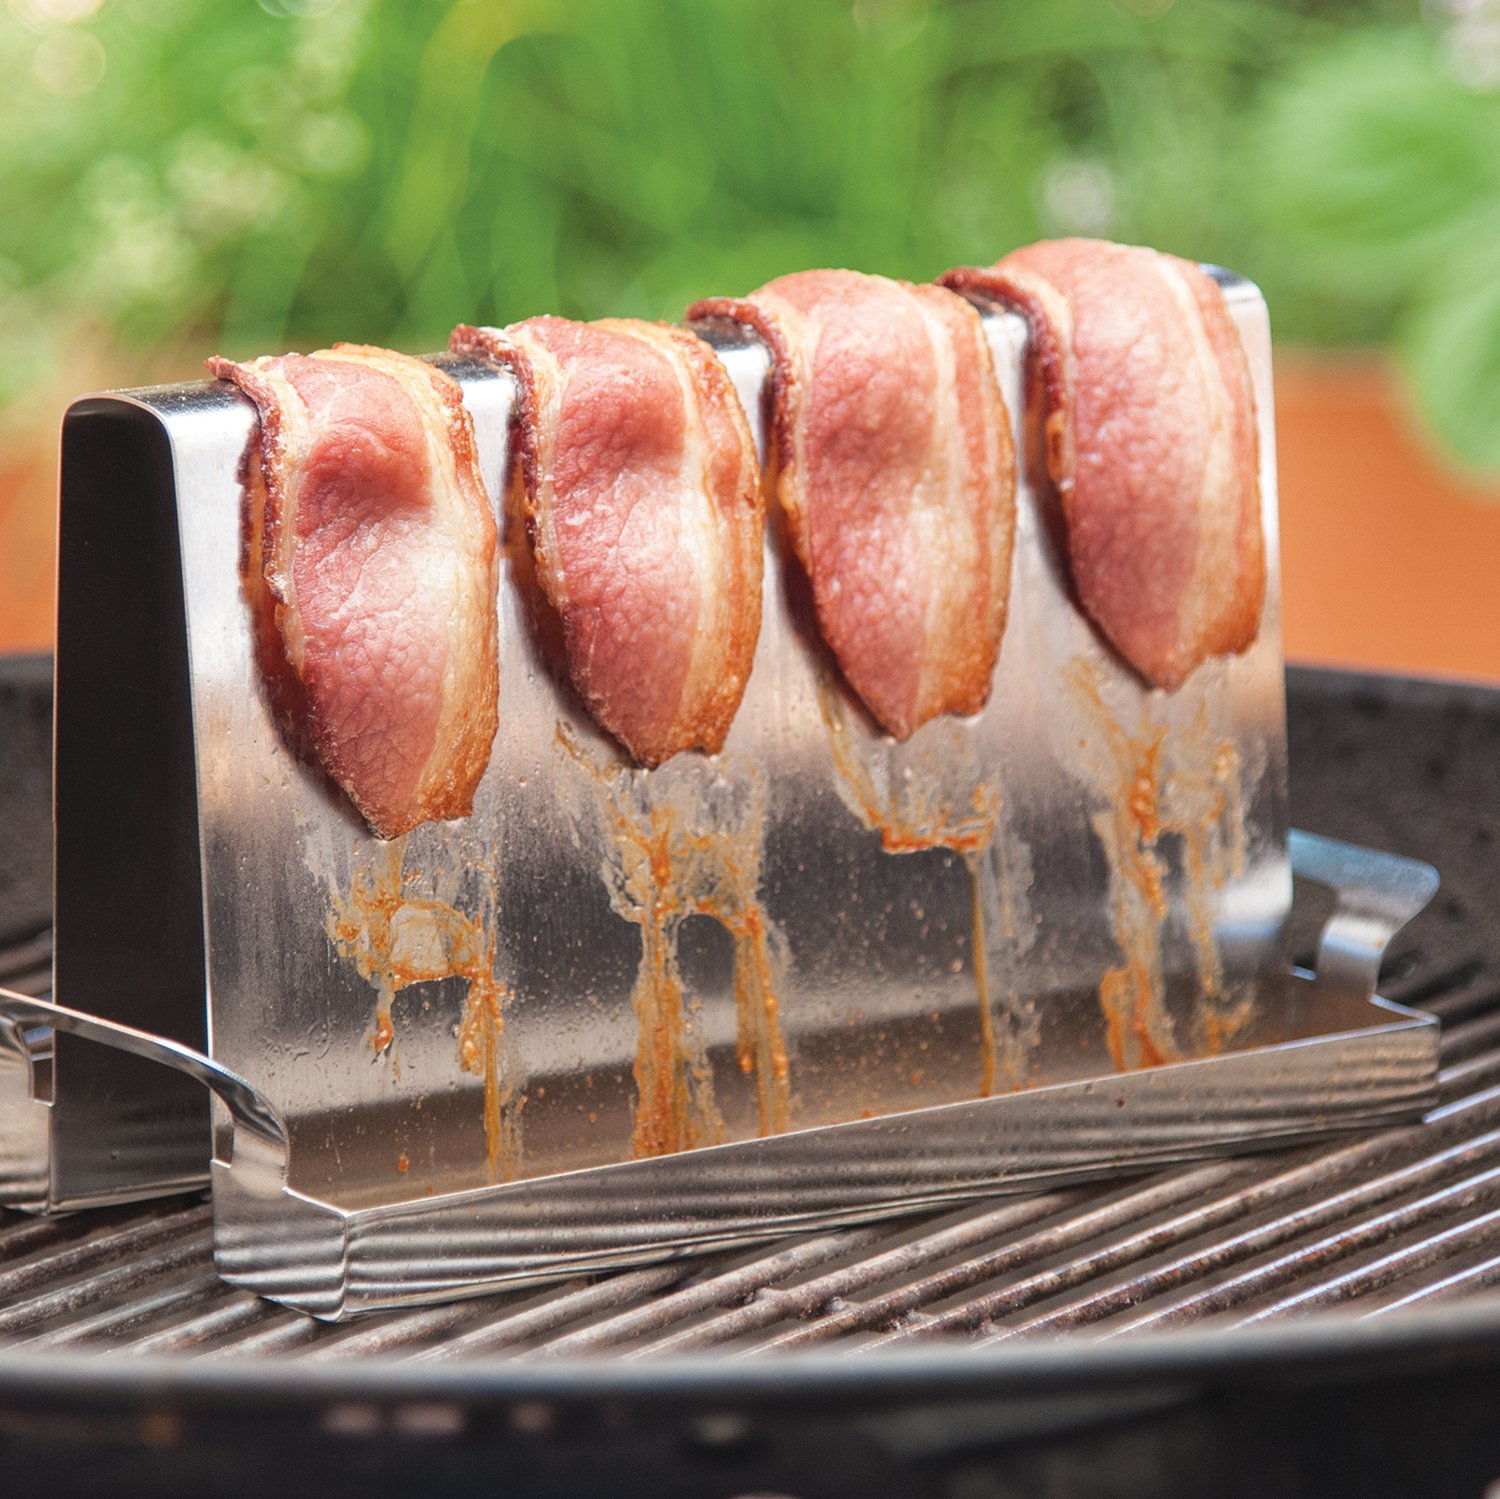 This bacon grilling rack will cook your delicious bacon without